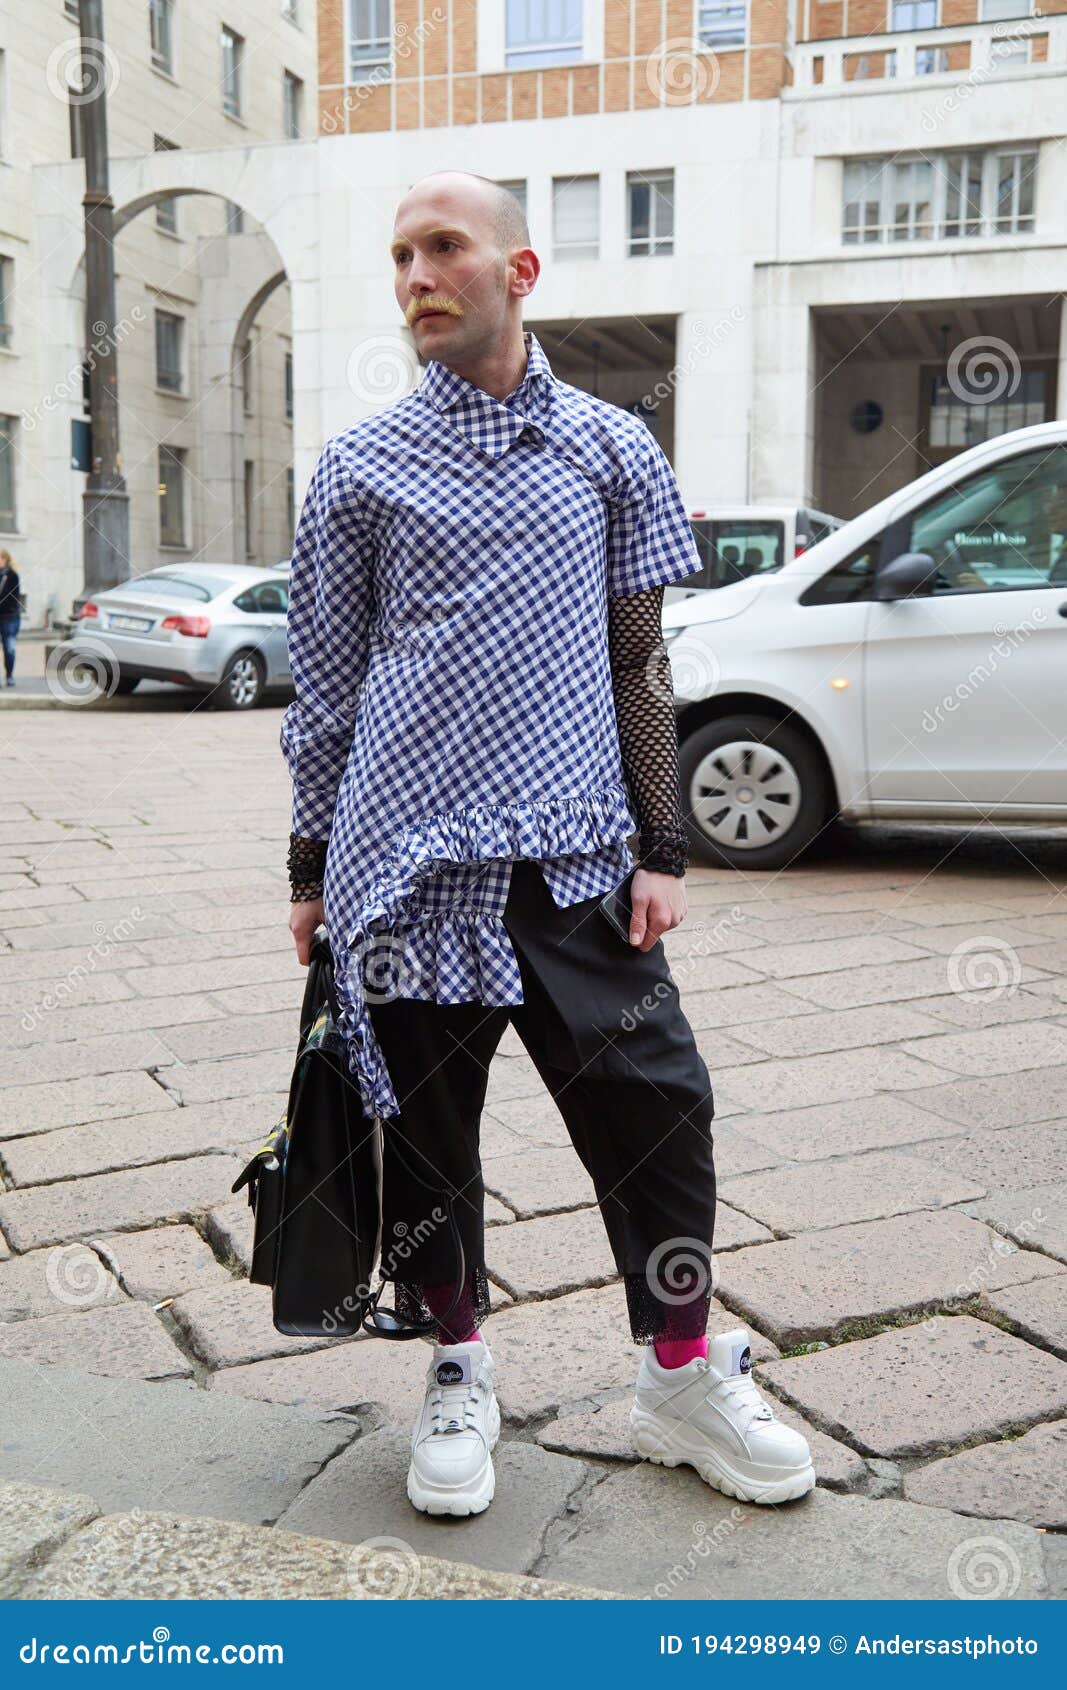 Man Checkered Long Shirt and White Shoes before Frankie Morello Fashion Show, Milan Editorial Image - Image of shoes, outdoor: 194298949